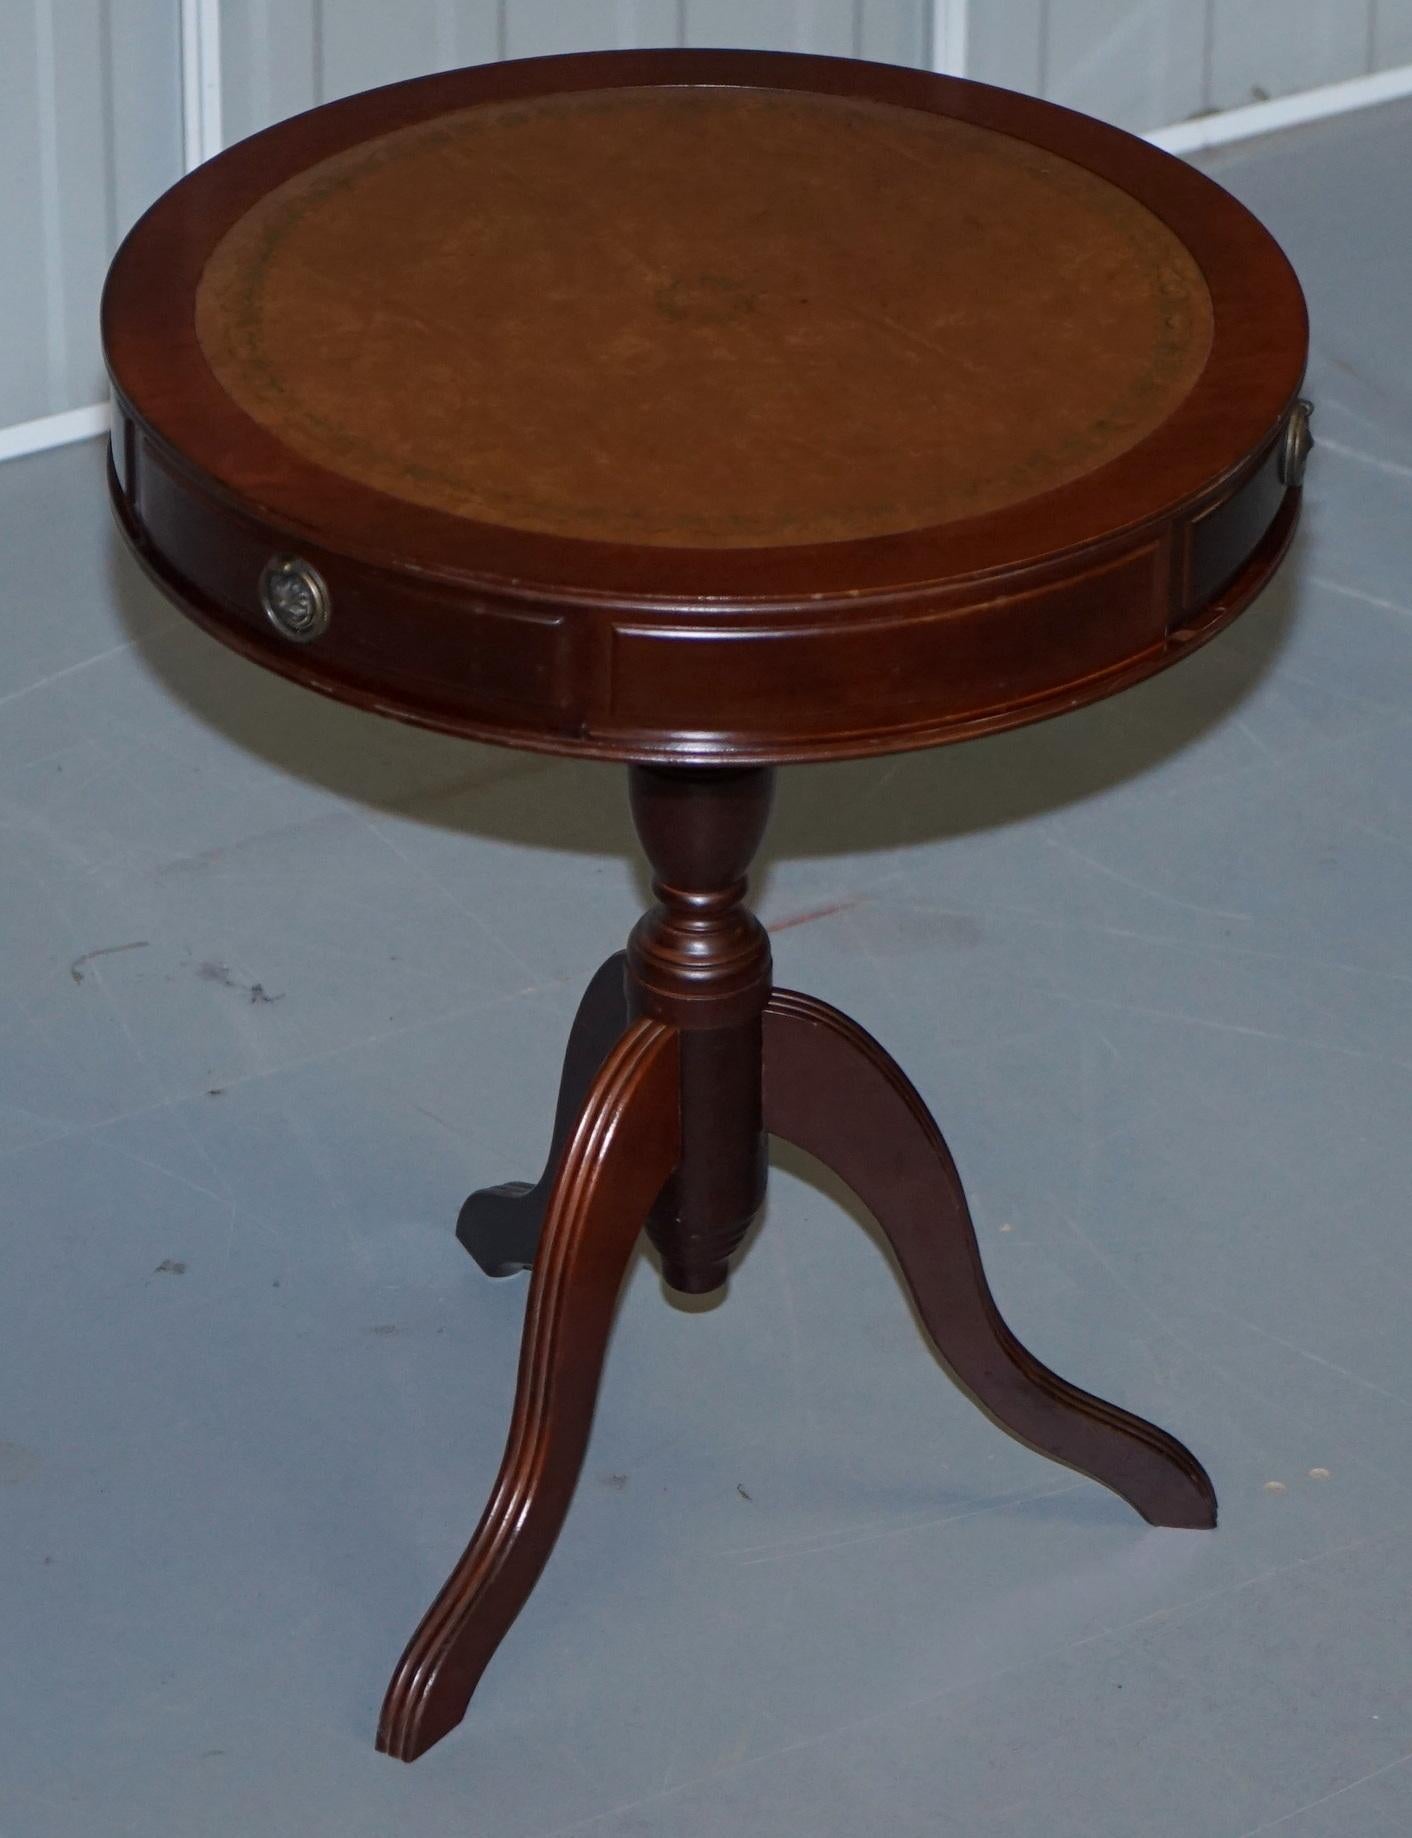 We are delighted to offer for sale this lovely Bevan Funnell mahogany with brown leather gold leaf tooled top, regency style side drum table

A very good looking and well made piece, the leather top is gold leaf embossed, the table has three nice